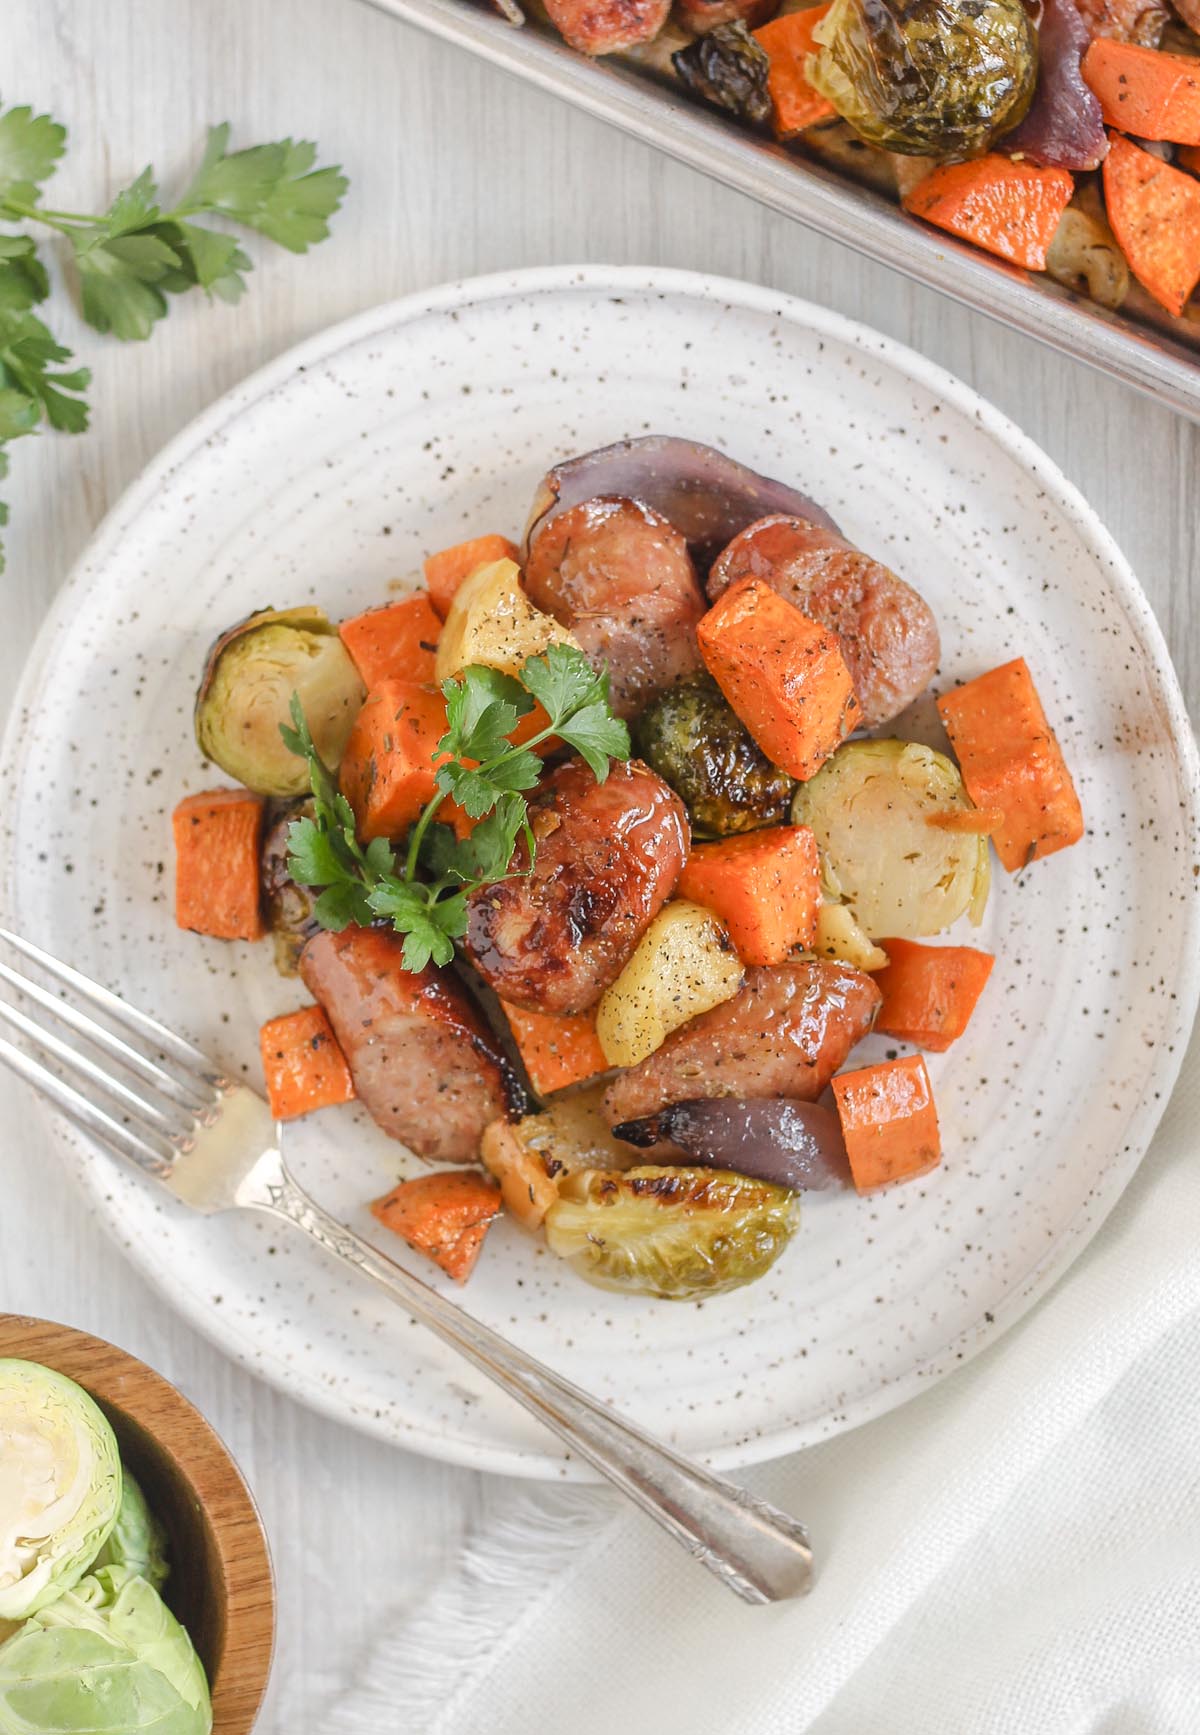 Chicken sausage with roasted veggies on a round white plate topped with parsley with a vintage fork on the plate.